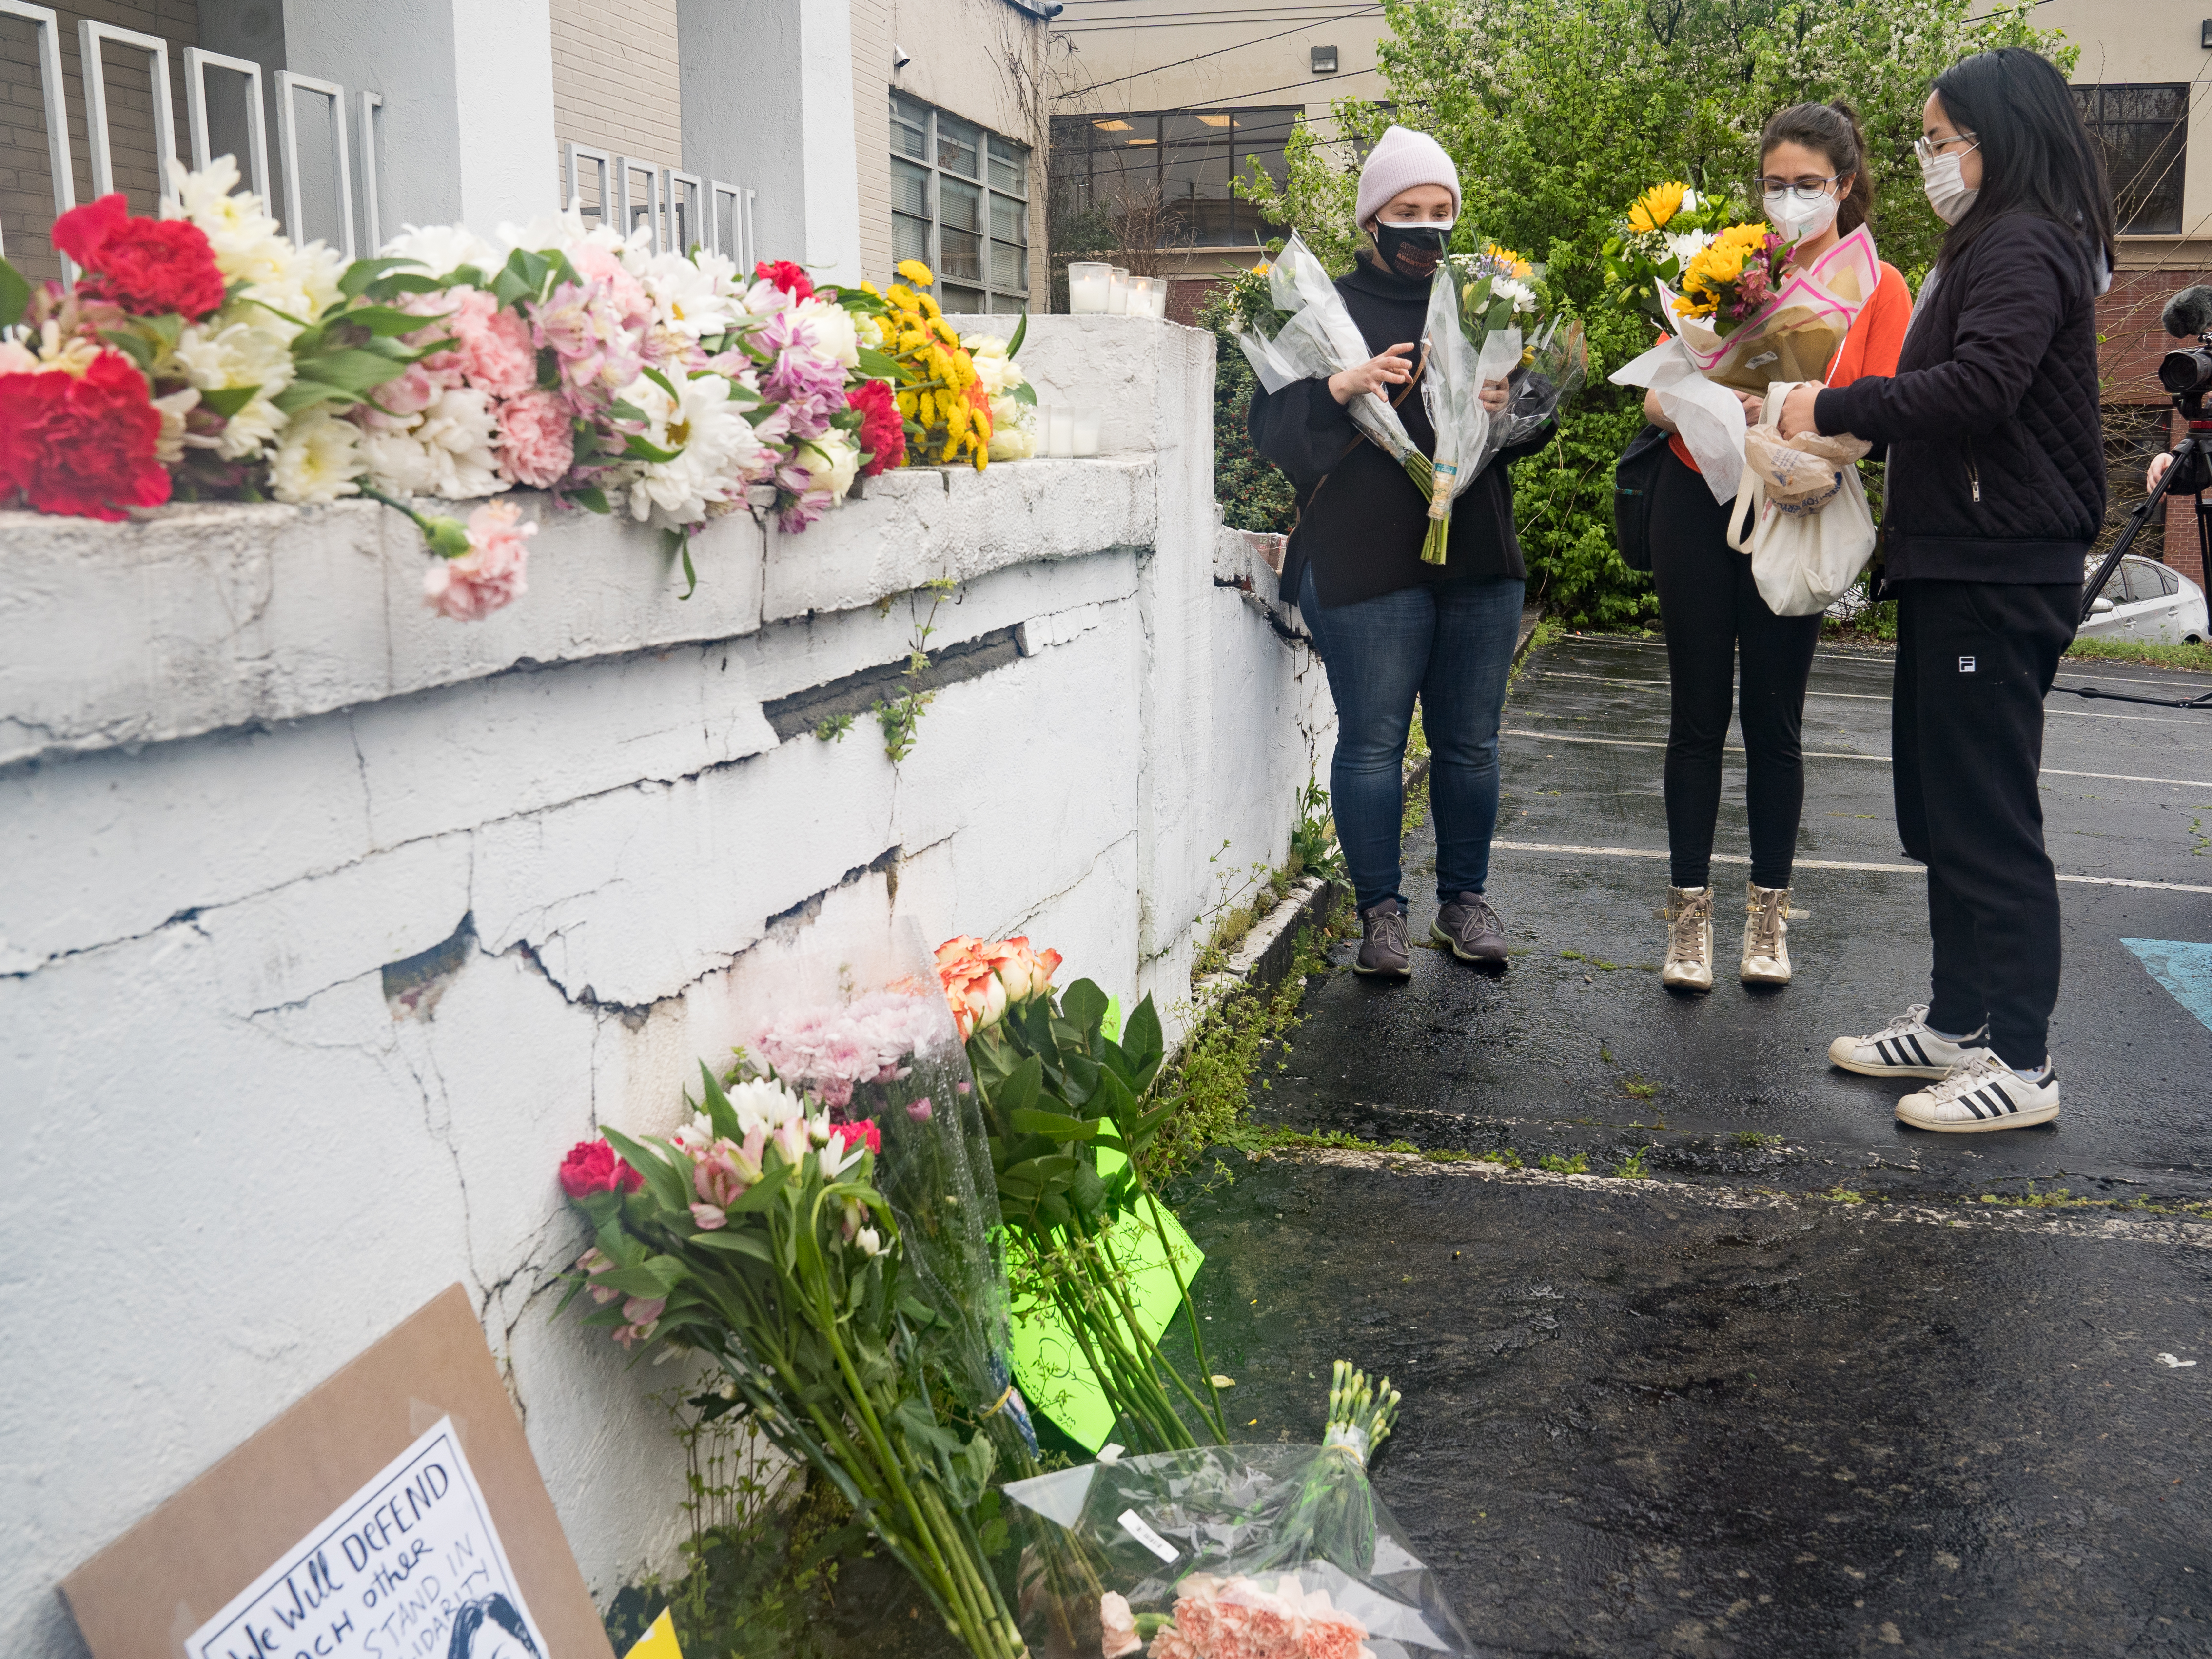 Mourners visit and leave flowers on Wednesday at the site of two shootings at spas across the street from one another in Atlanta. CREDIT: Megan Varner/Getty Images